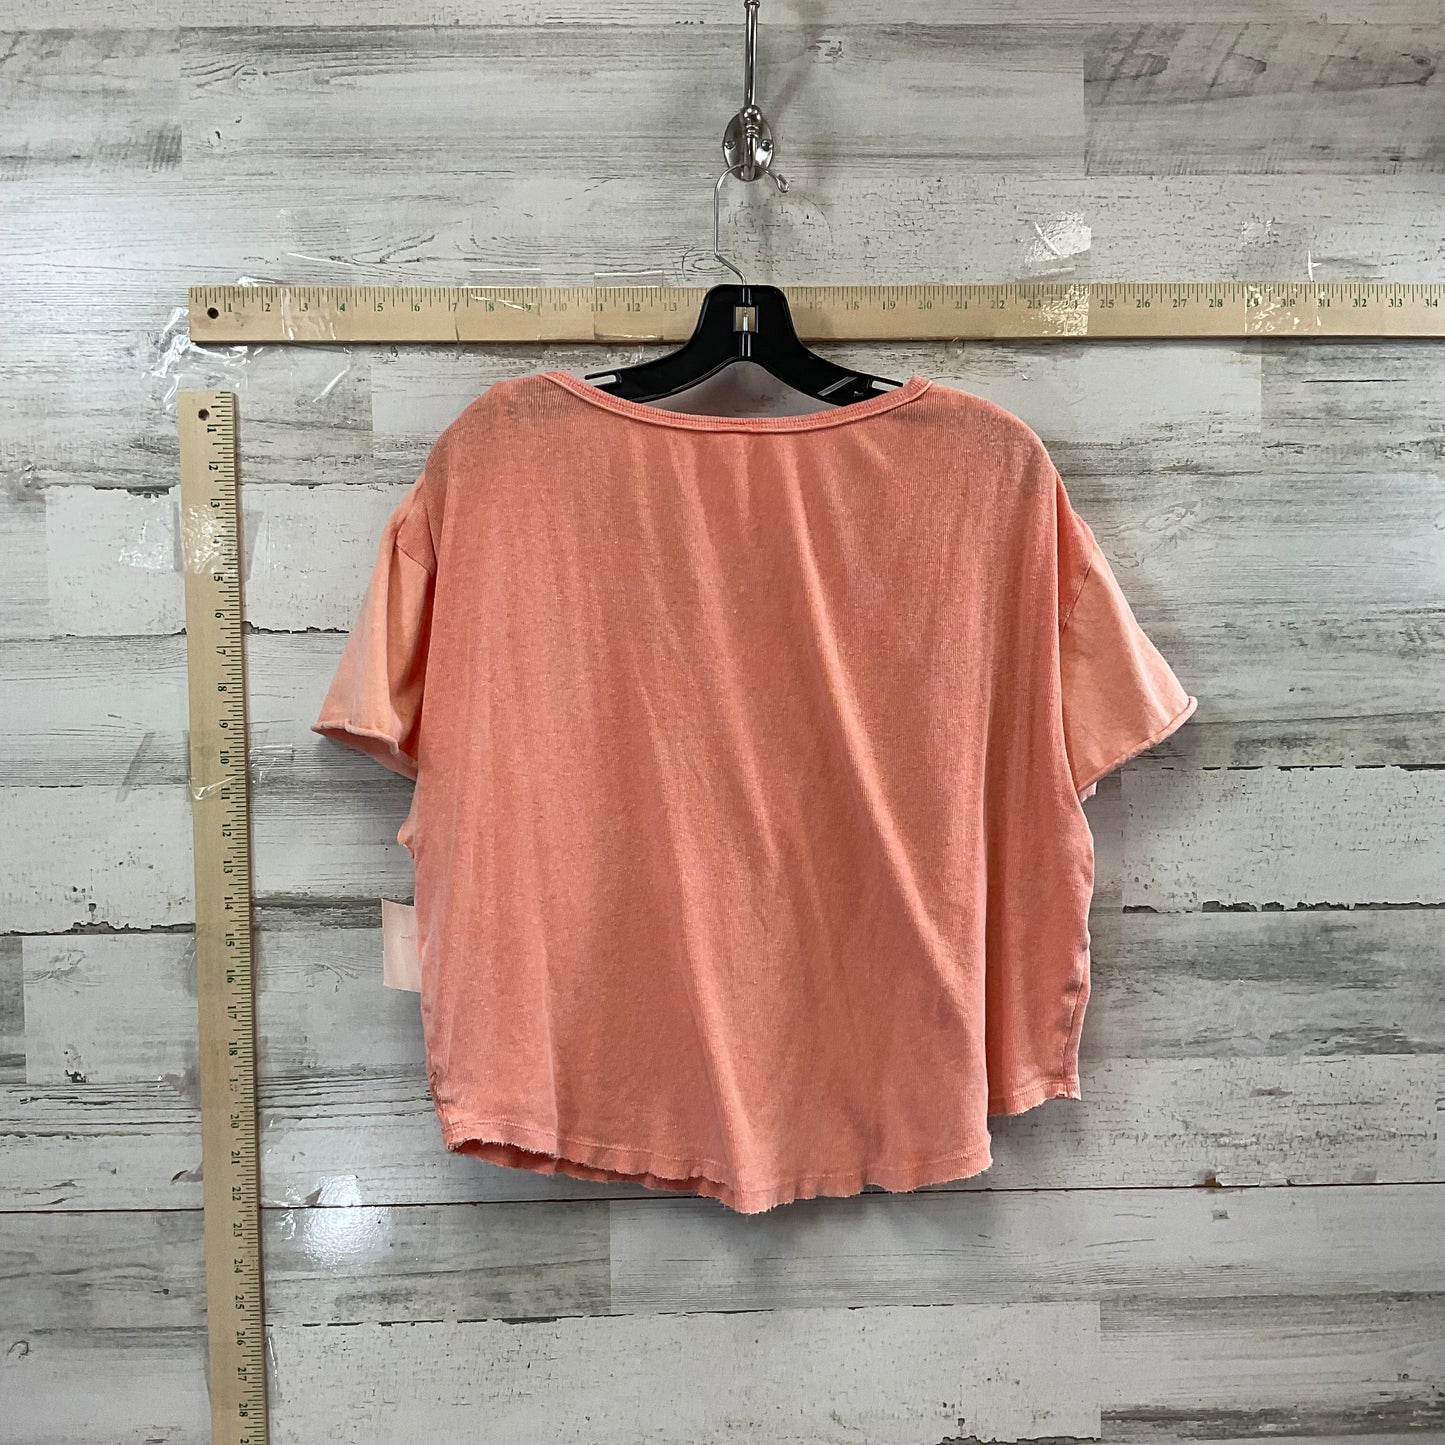 Peach Top Short Sleeve Free People, Size Xs